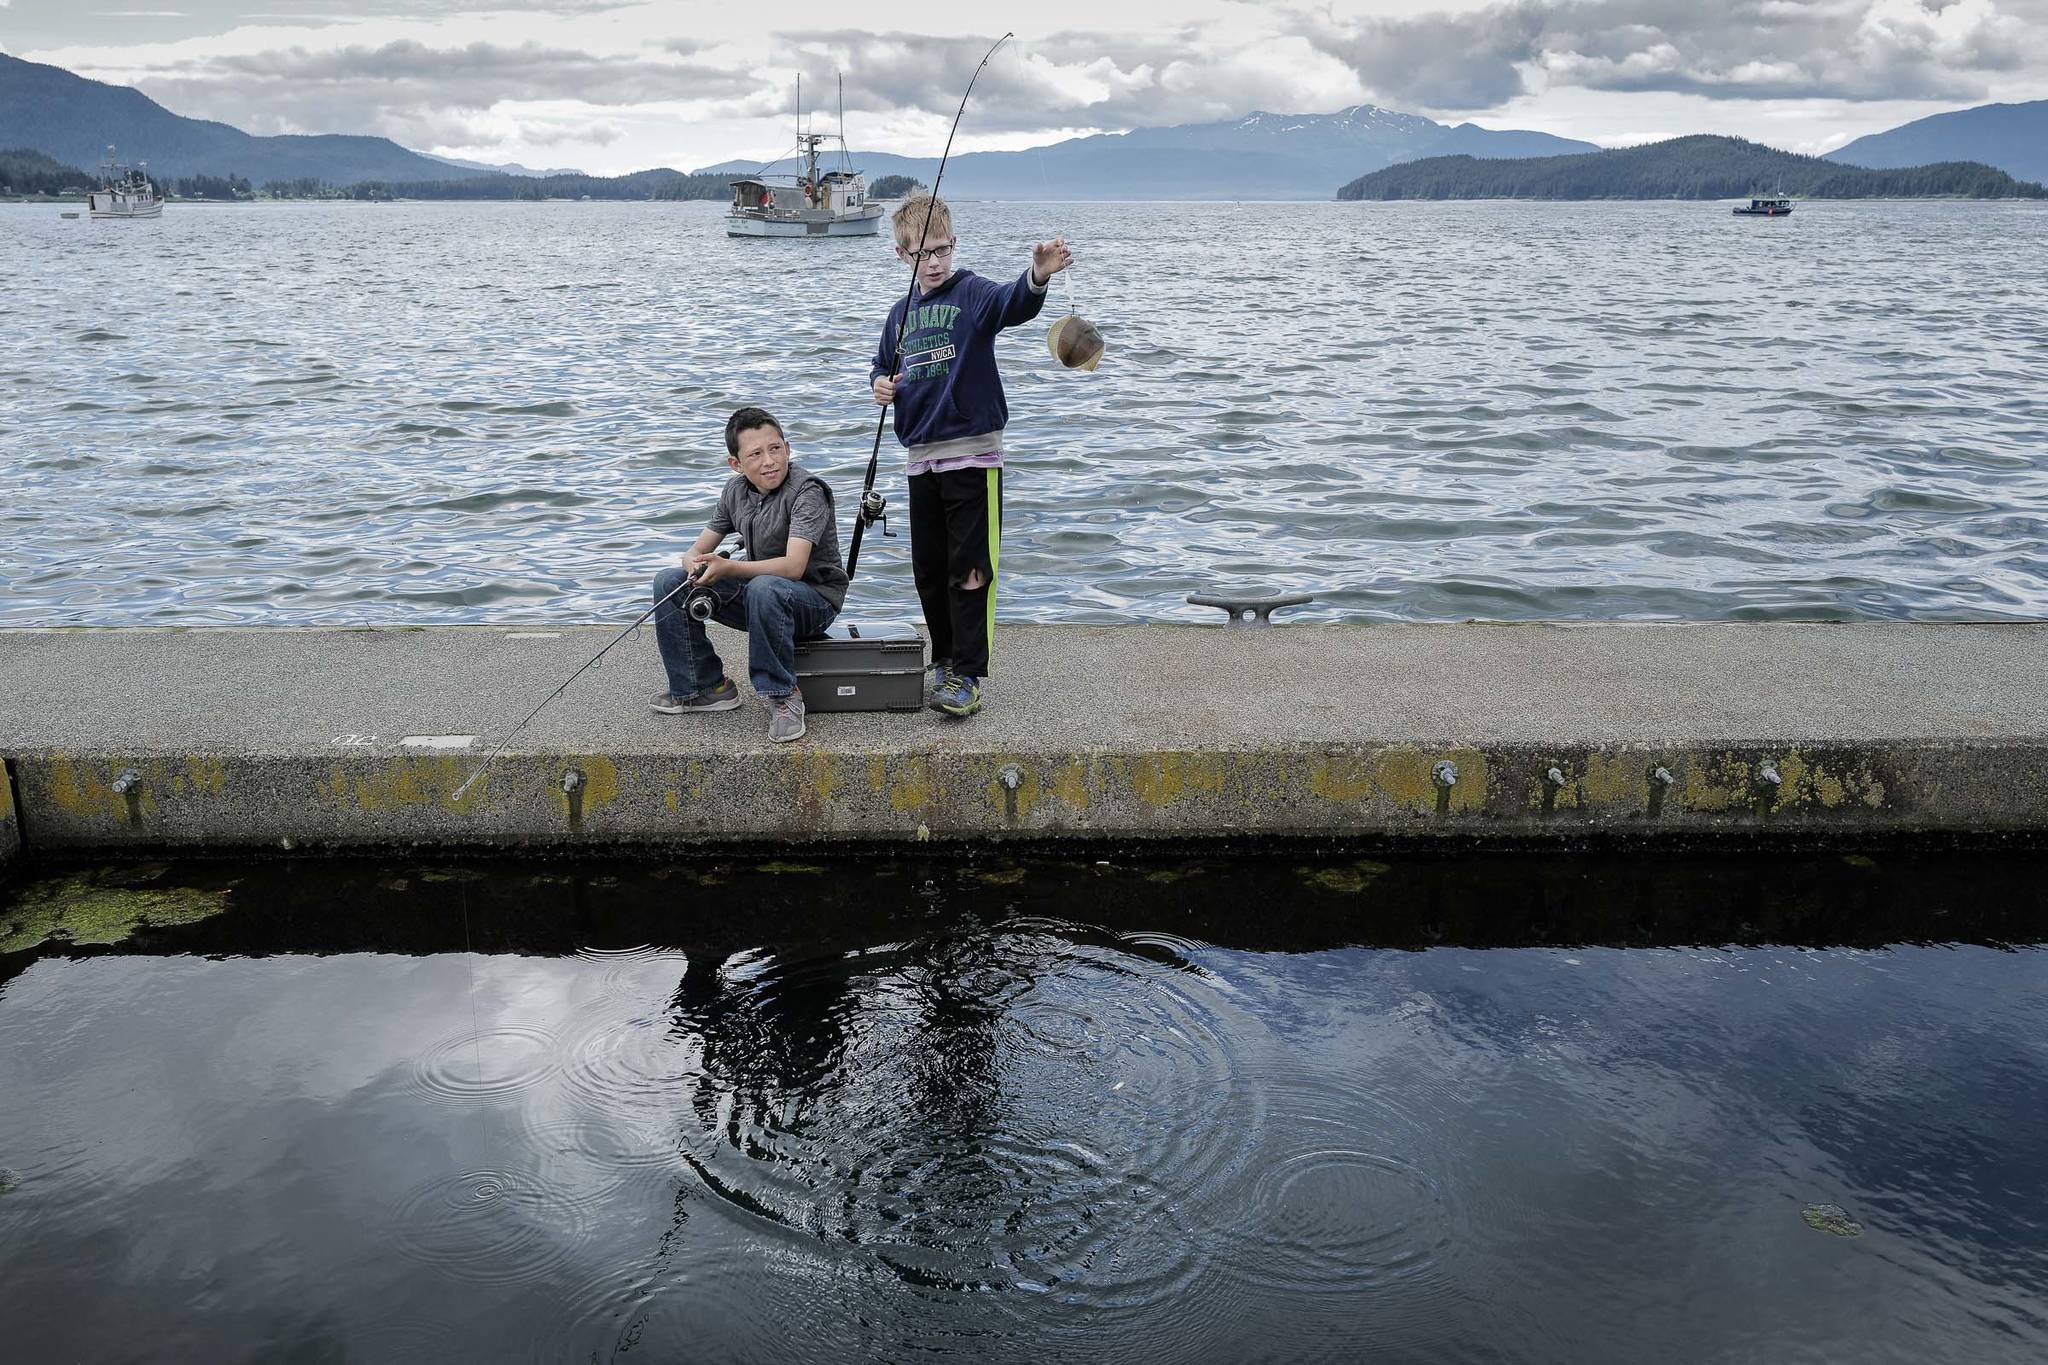 Scott Newman, 10, watches Steel Morgan, 10, pull out a small flounder at the Don D. Statter Memorial Boat Harbor in Auke Bay, on Monday, June 24, 2019. (Michael Penn | Juneau Empire)